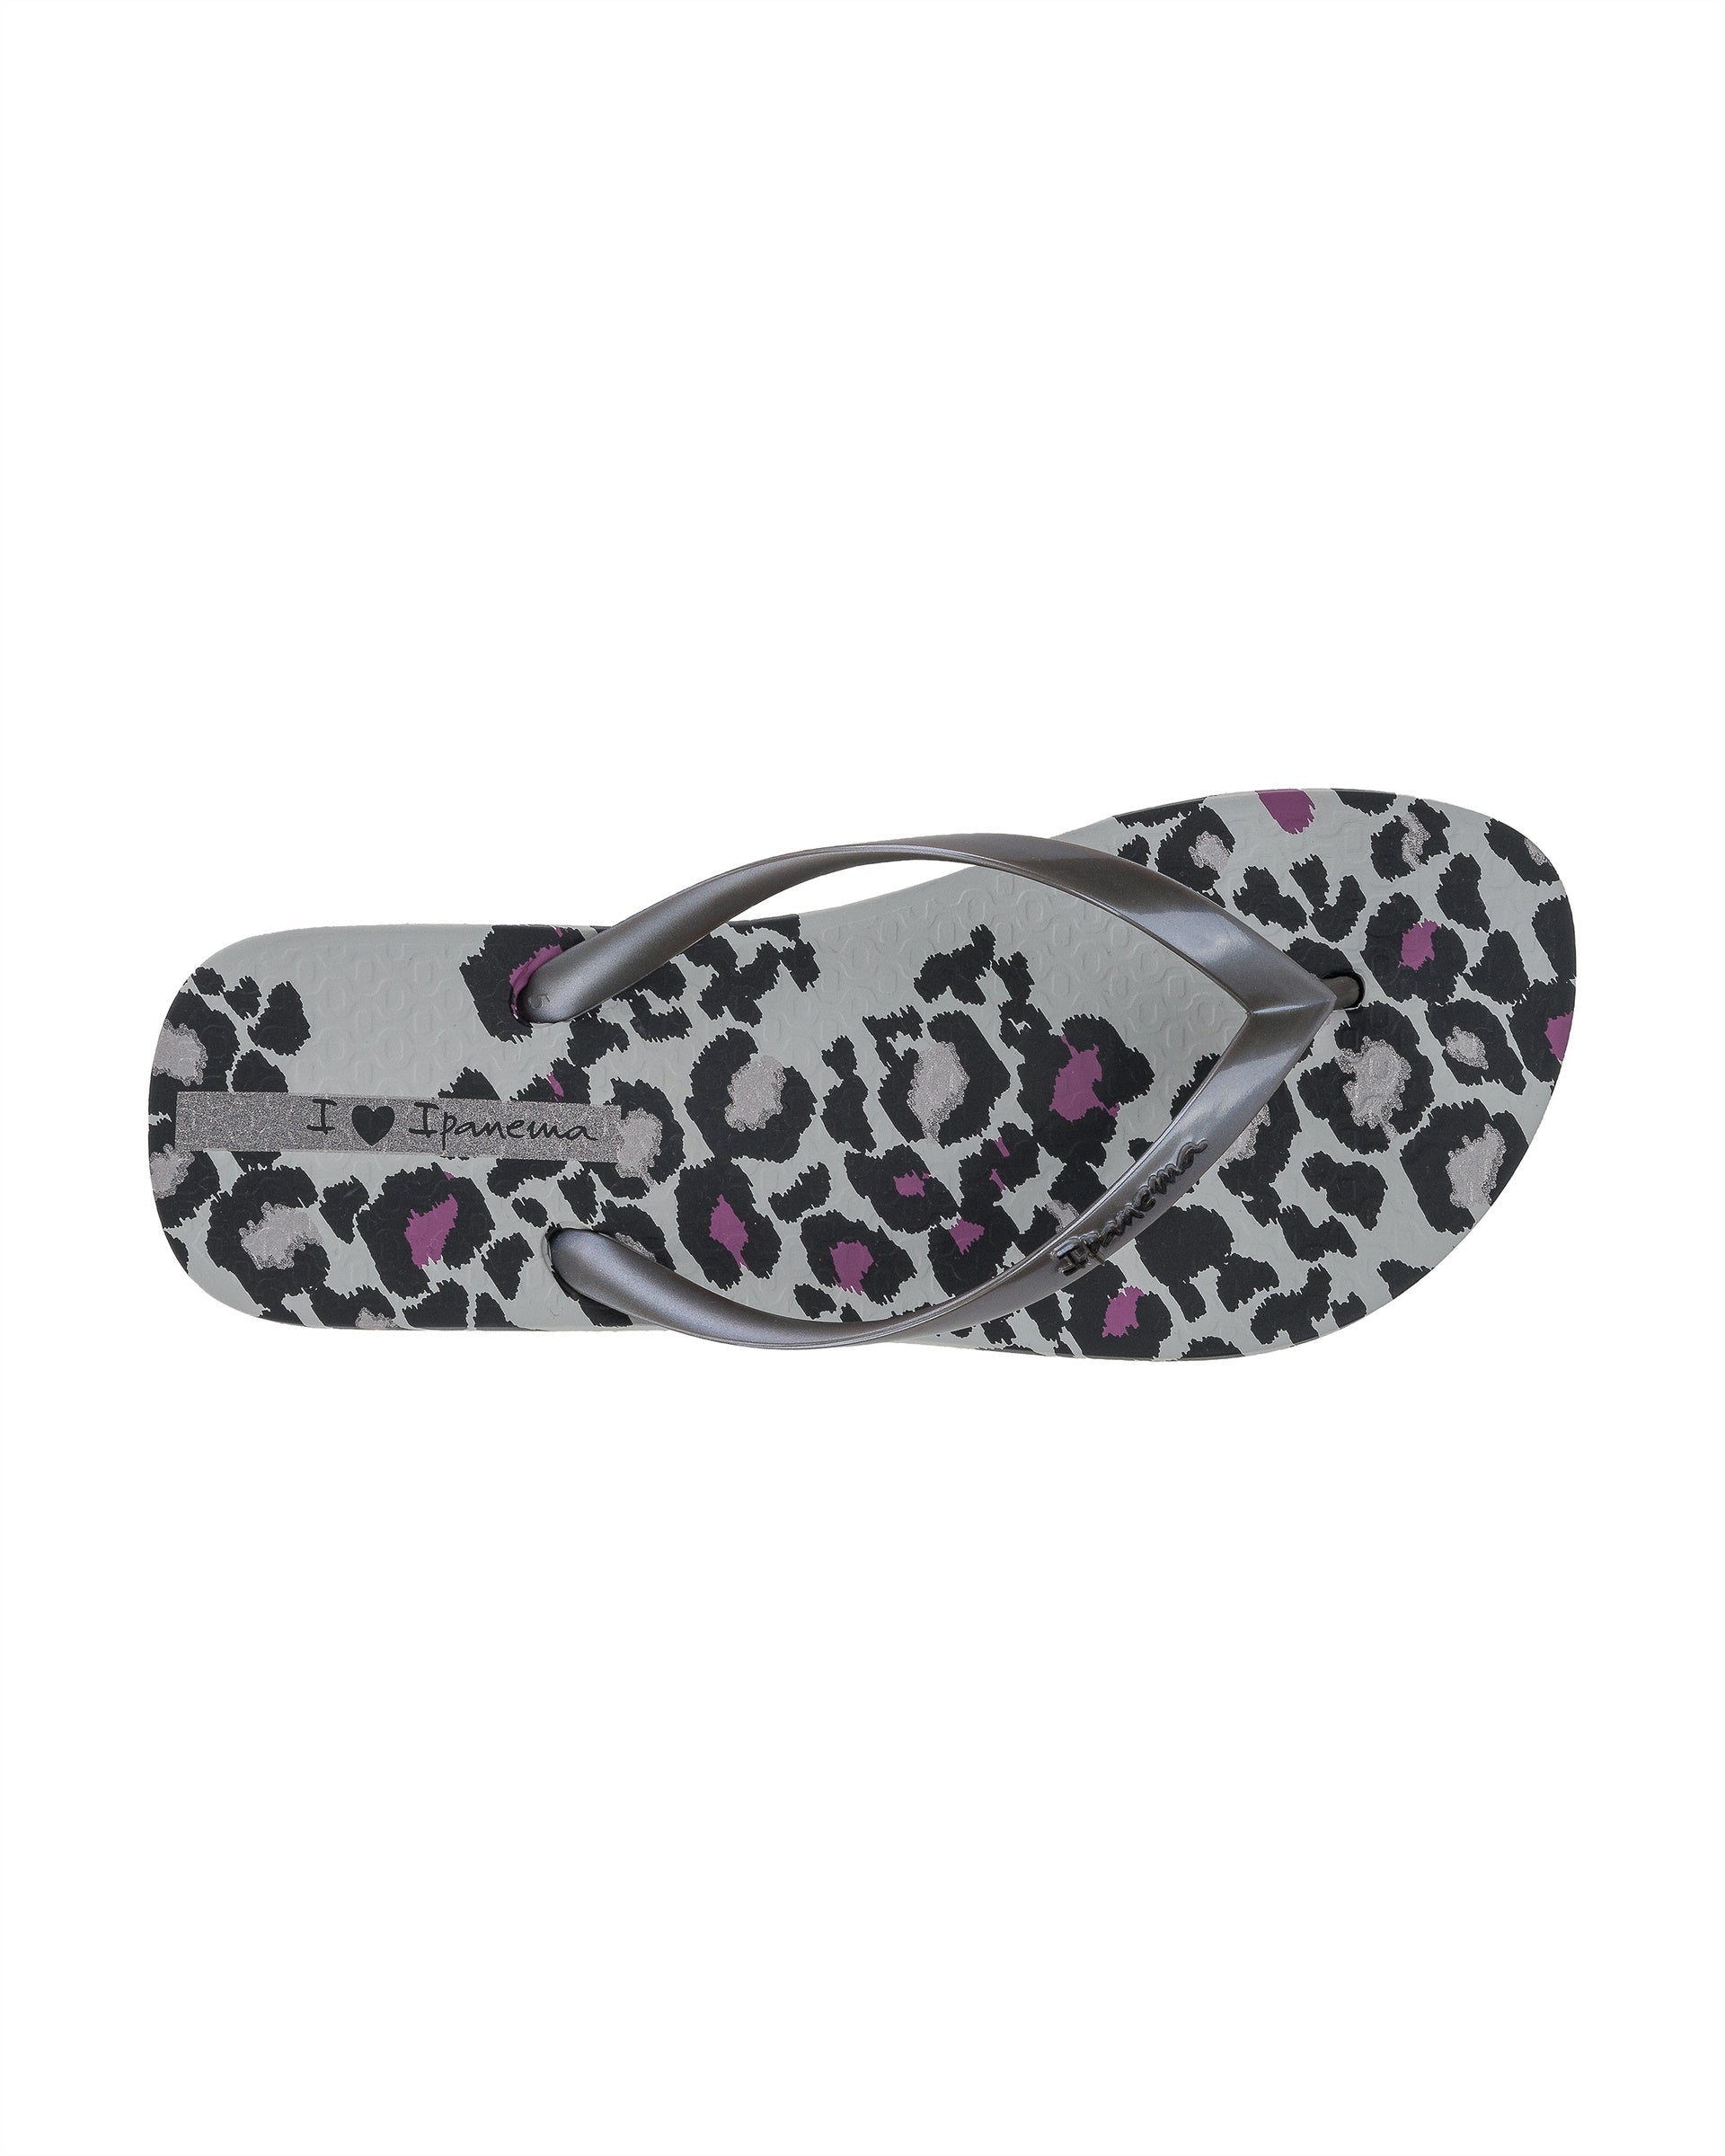 Top view of a grey Ipanema Animal Print women's flip flop with glitter grey straps and leopard sole print.